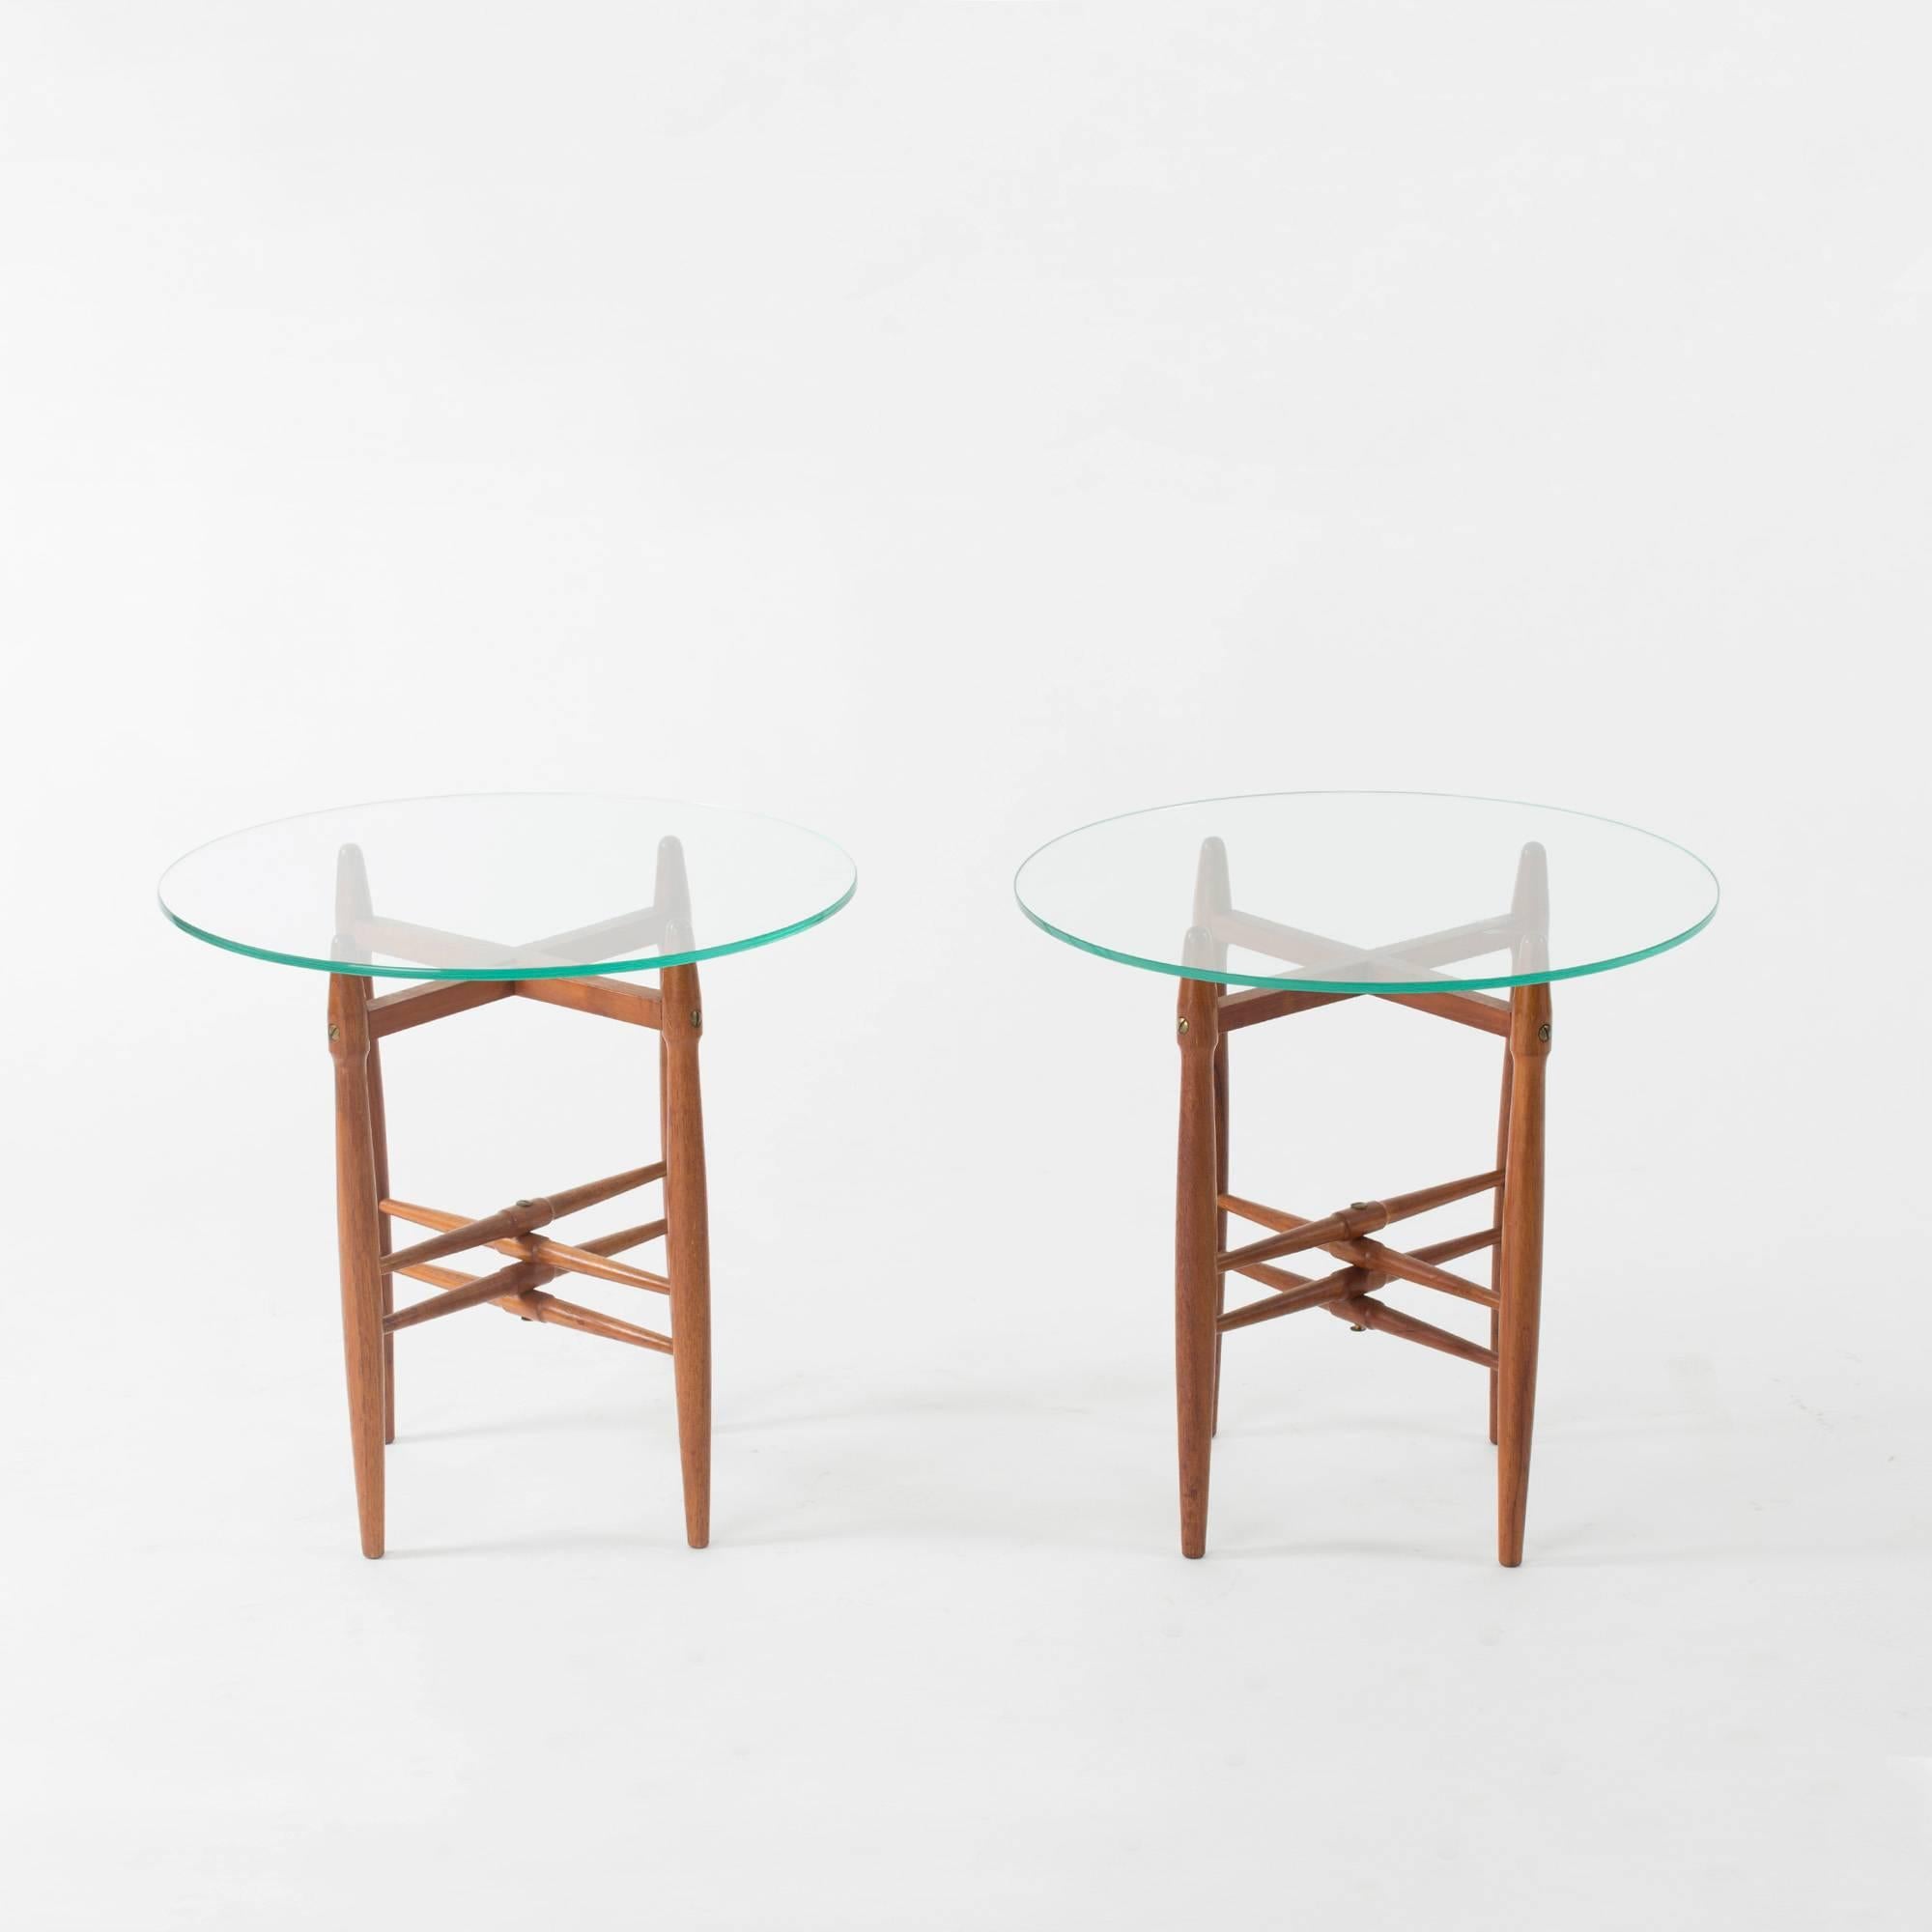 Pair of mahogany side tables with round green tinted glass tops by Poul Hundevad. Beautifully sculpted legs.